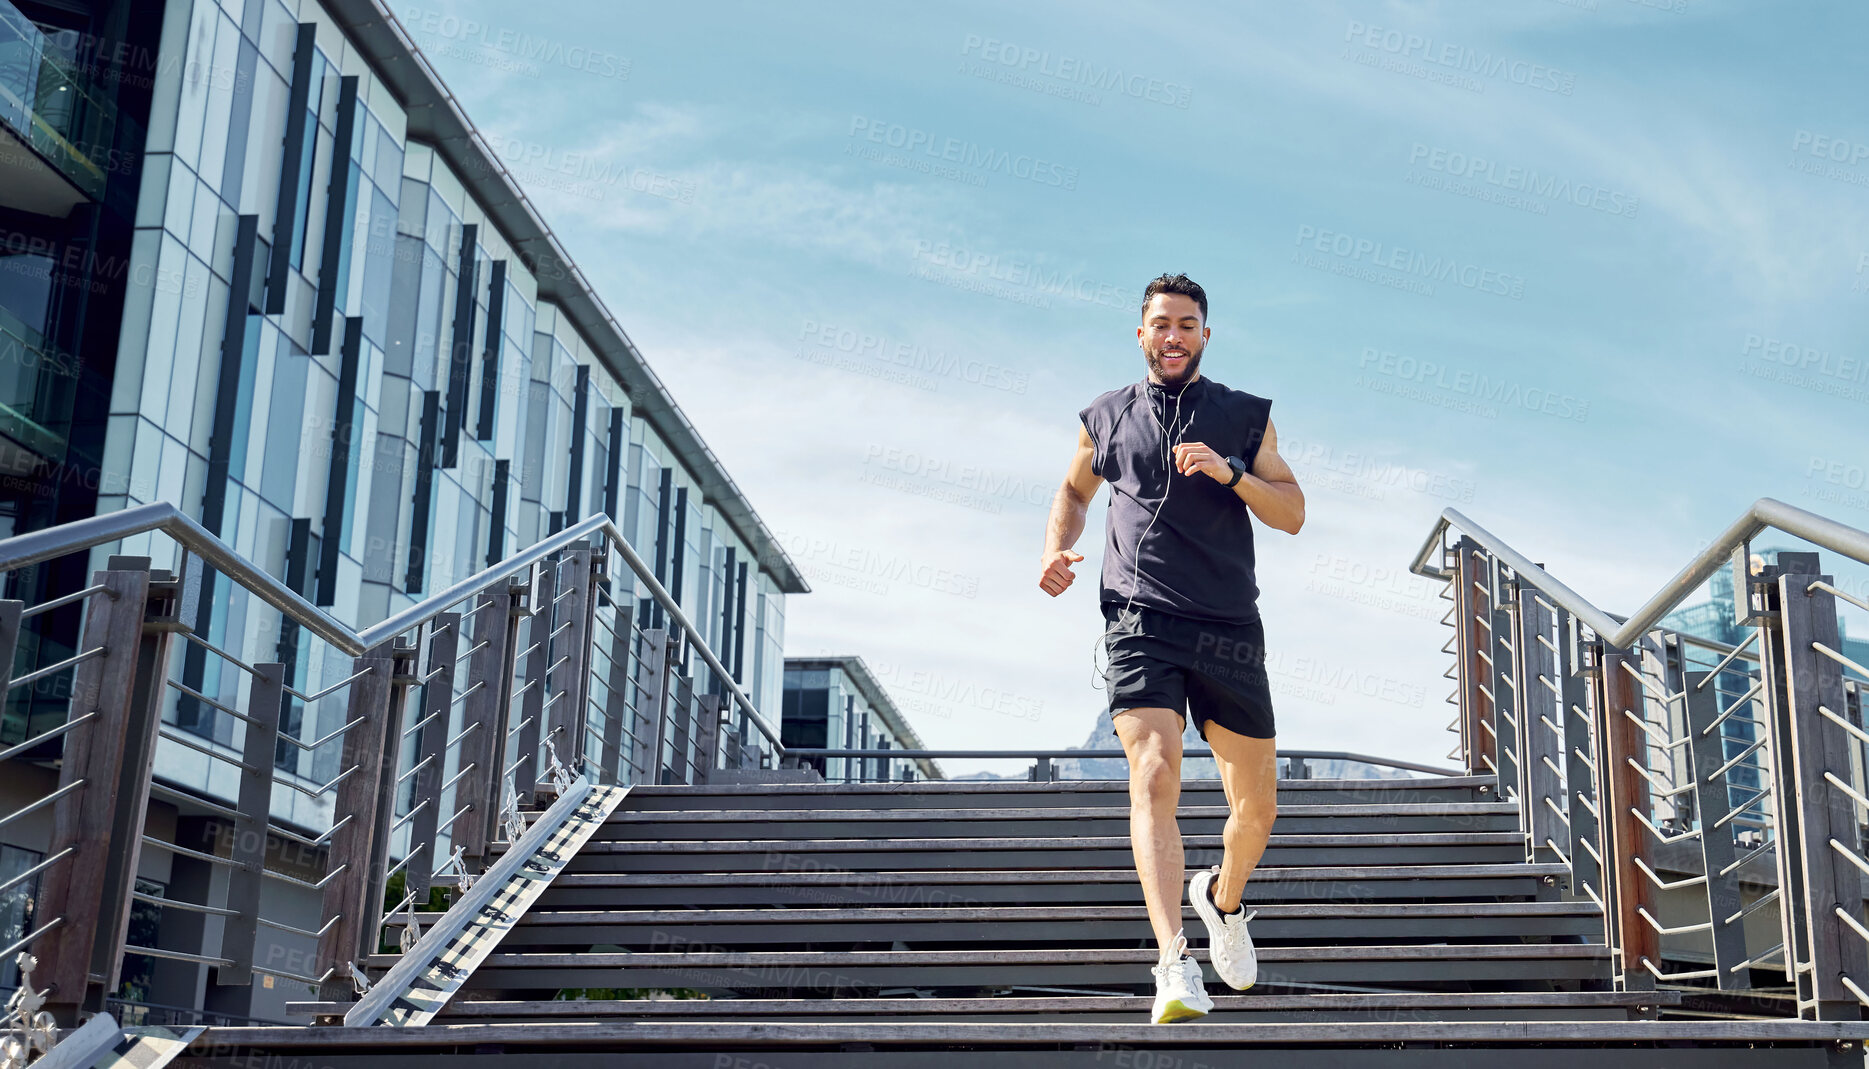 Buy stock photo Low angle shot of a sporty young man running down a staircase while exercising outdoors